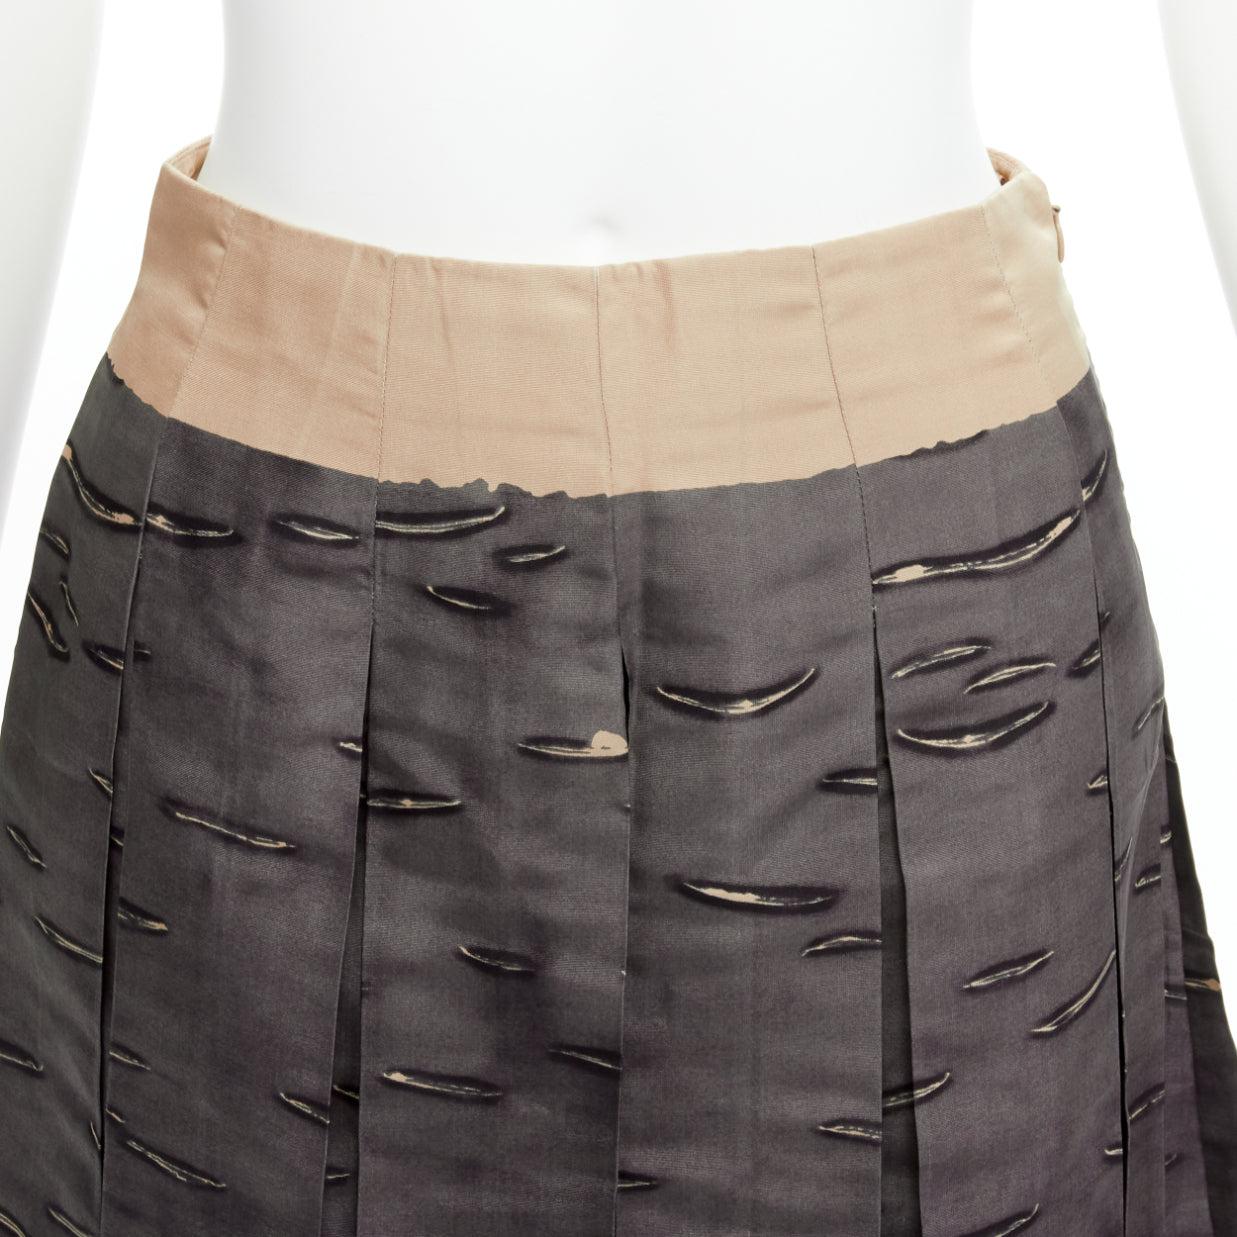 PRADA 2003 100% silk faille grey pattered contrast waistband pleated flared skirt IT36 XXS
Reference: PYCN/A00090
Brand: Prada
Designer: Miuccia Prada
Collection: 2003
Material: Silk
Color: Beige, Grey
Pattern: Abstract
Closure: Zip
Lining: Nude